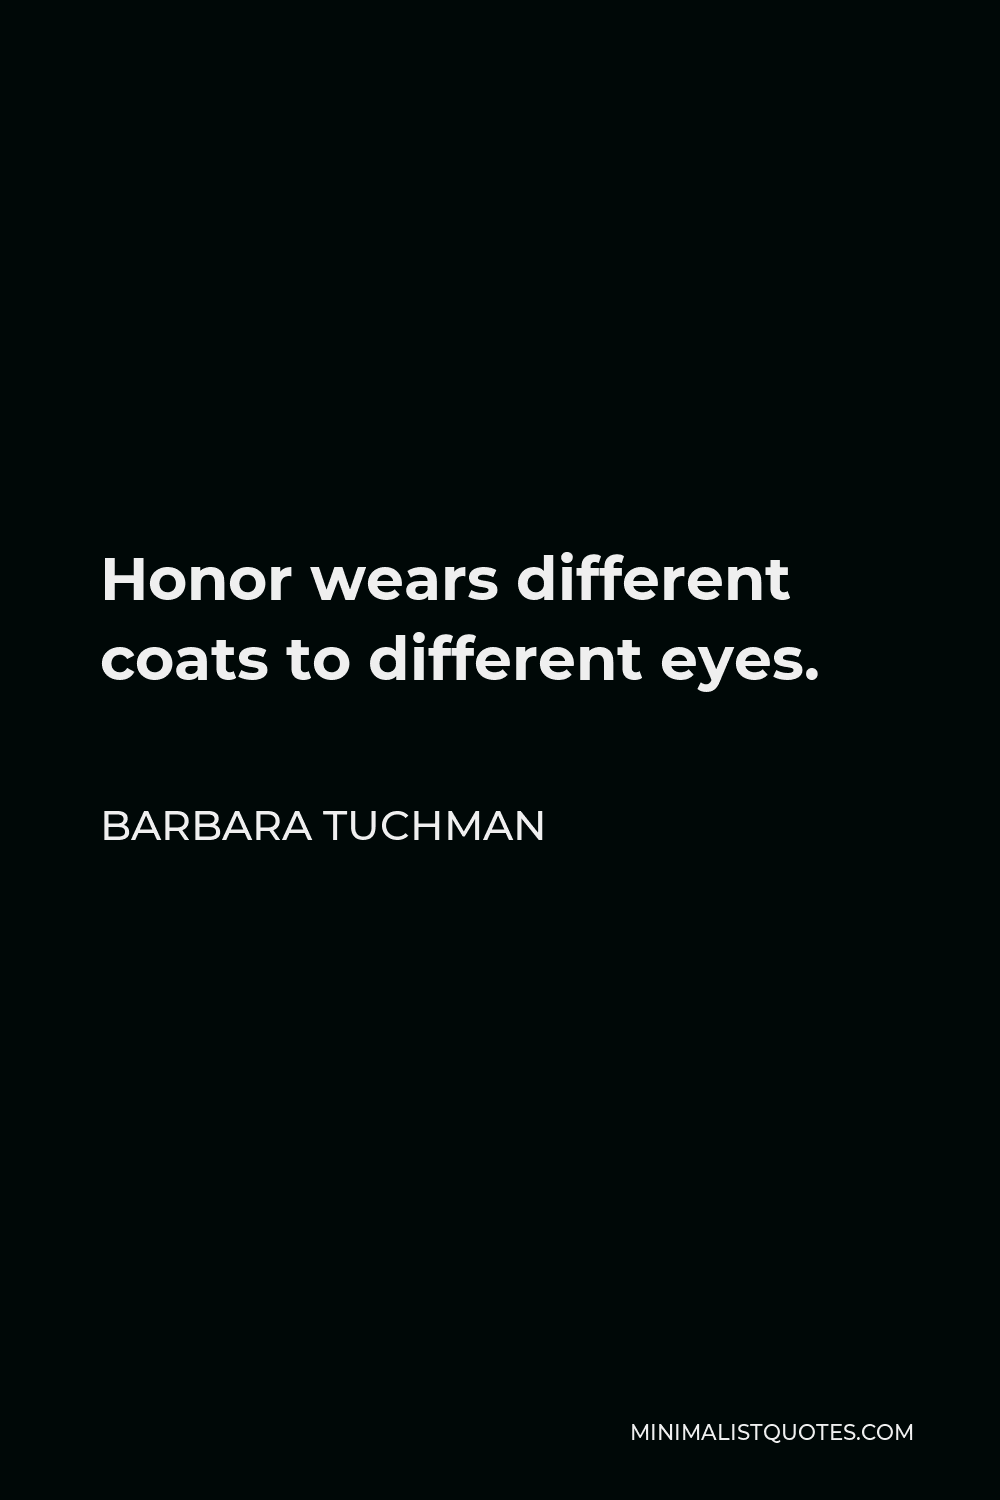 Barbara Tuchman Quote - Honor wears different coats to different eyes.